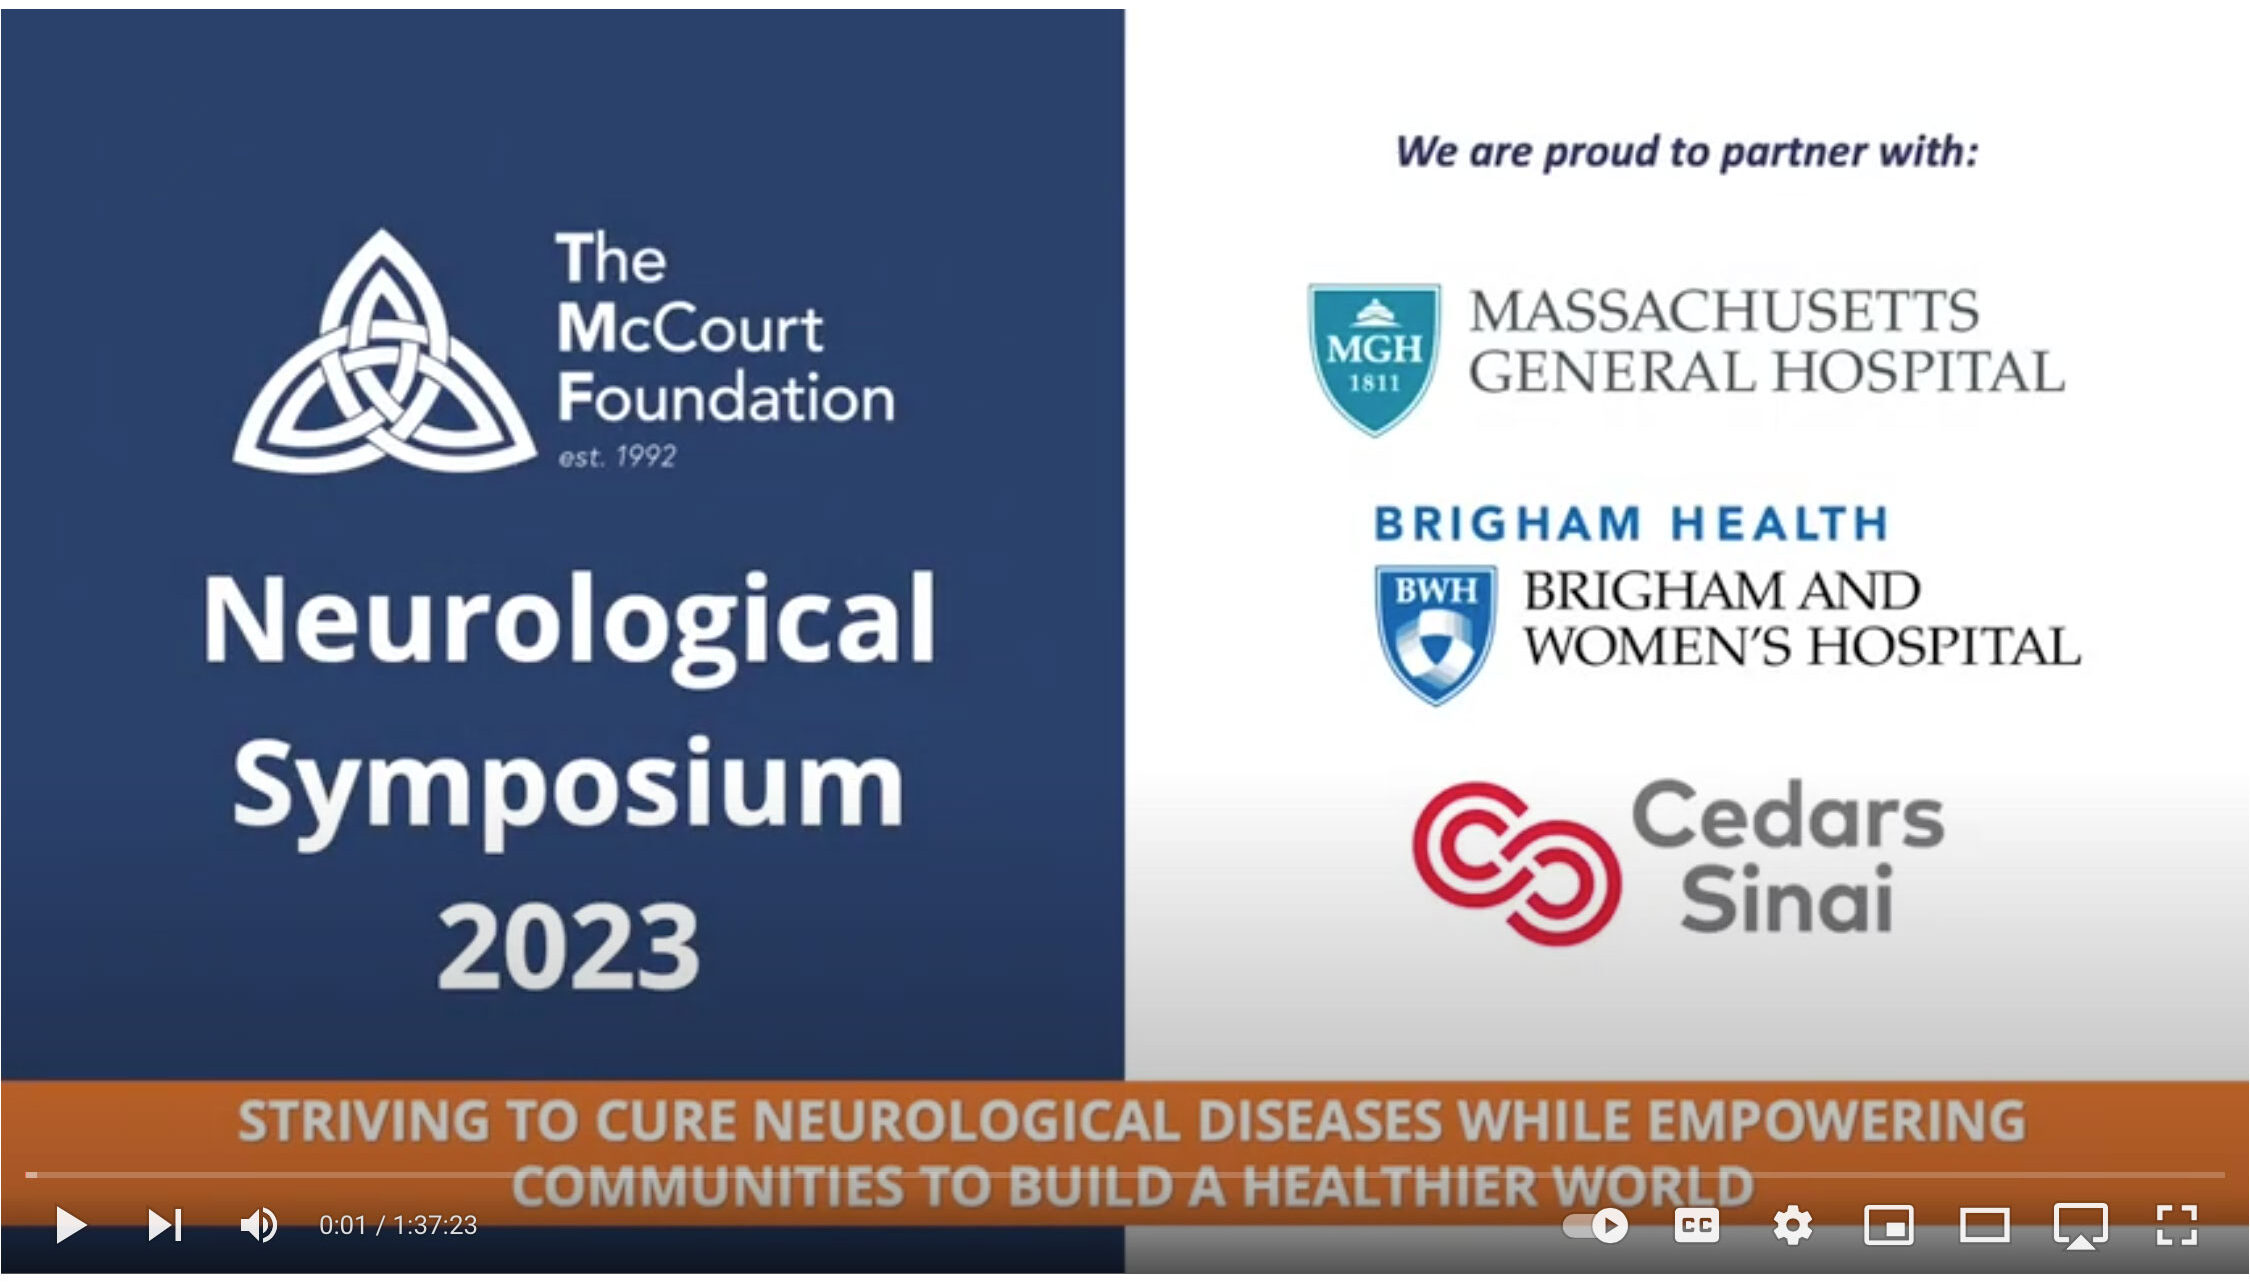 The 2023 McCourt Foundation’s Neurological Symposium - MS Session (Q&A) - Youtube Video